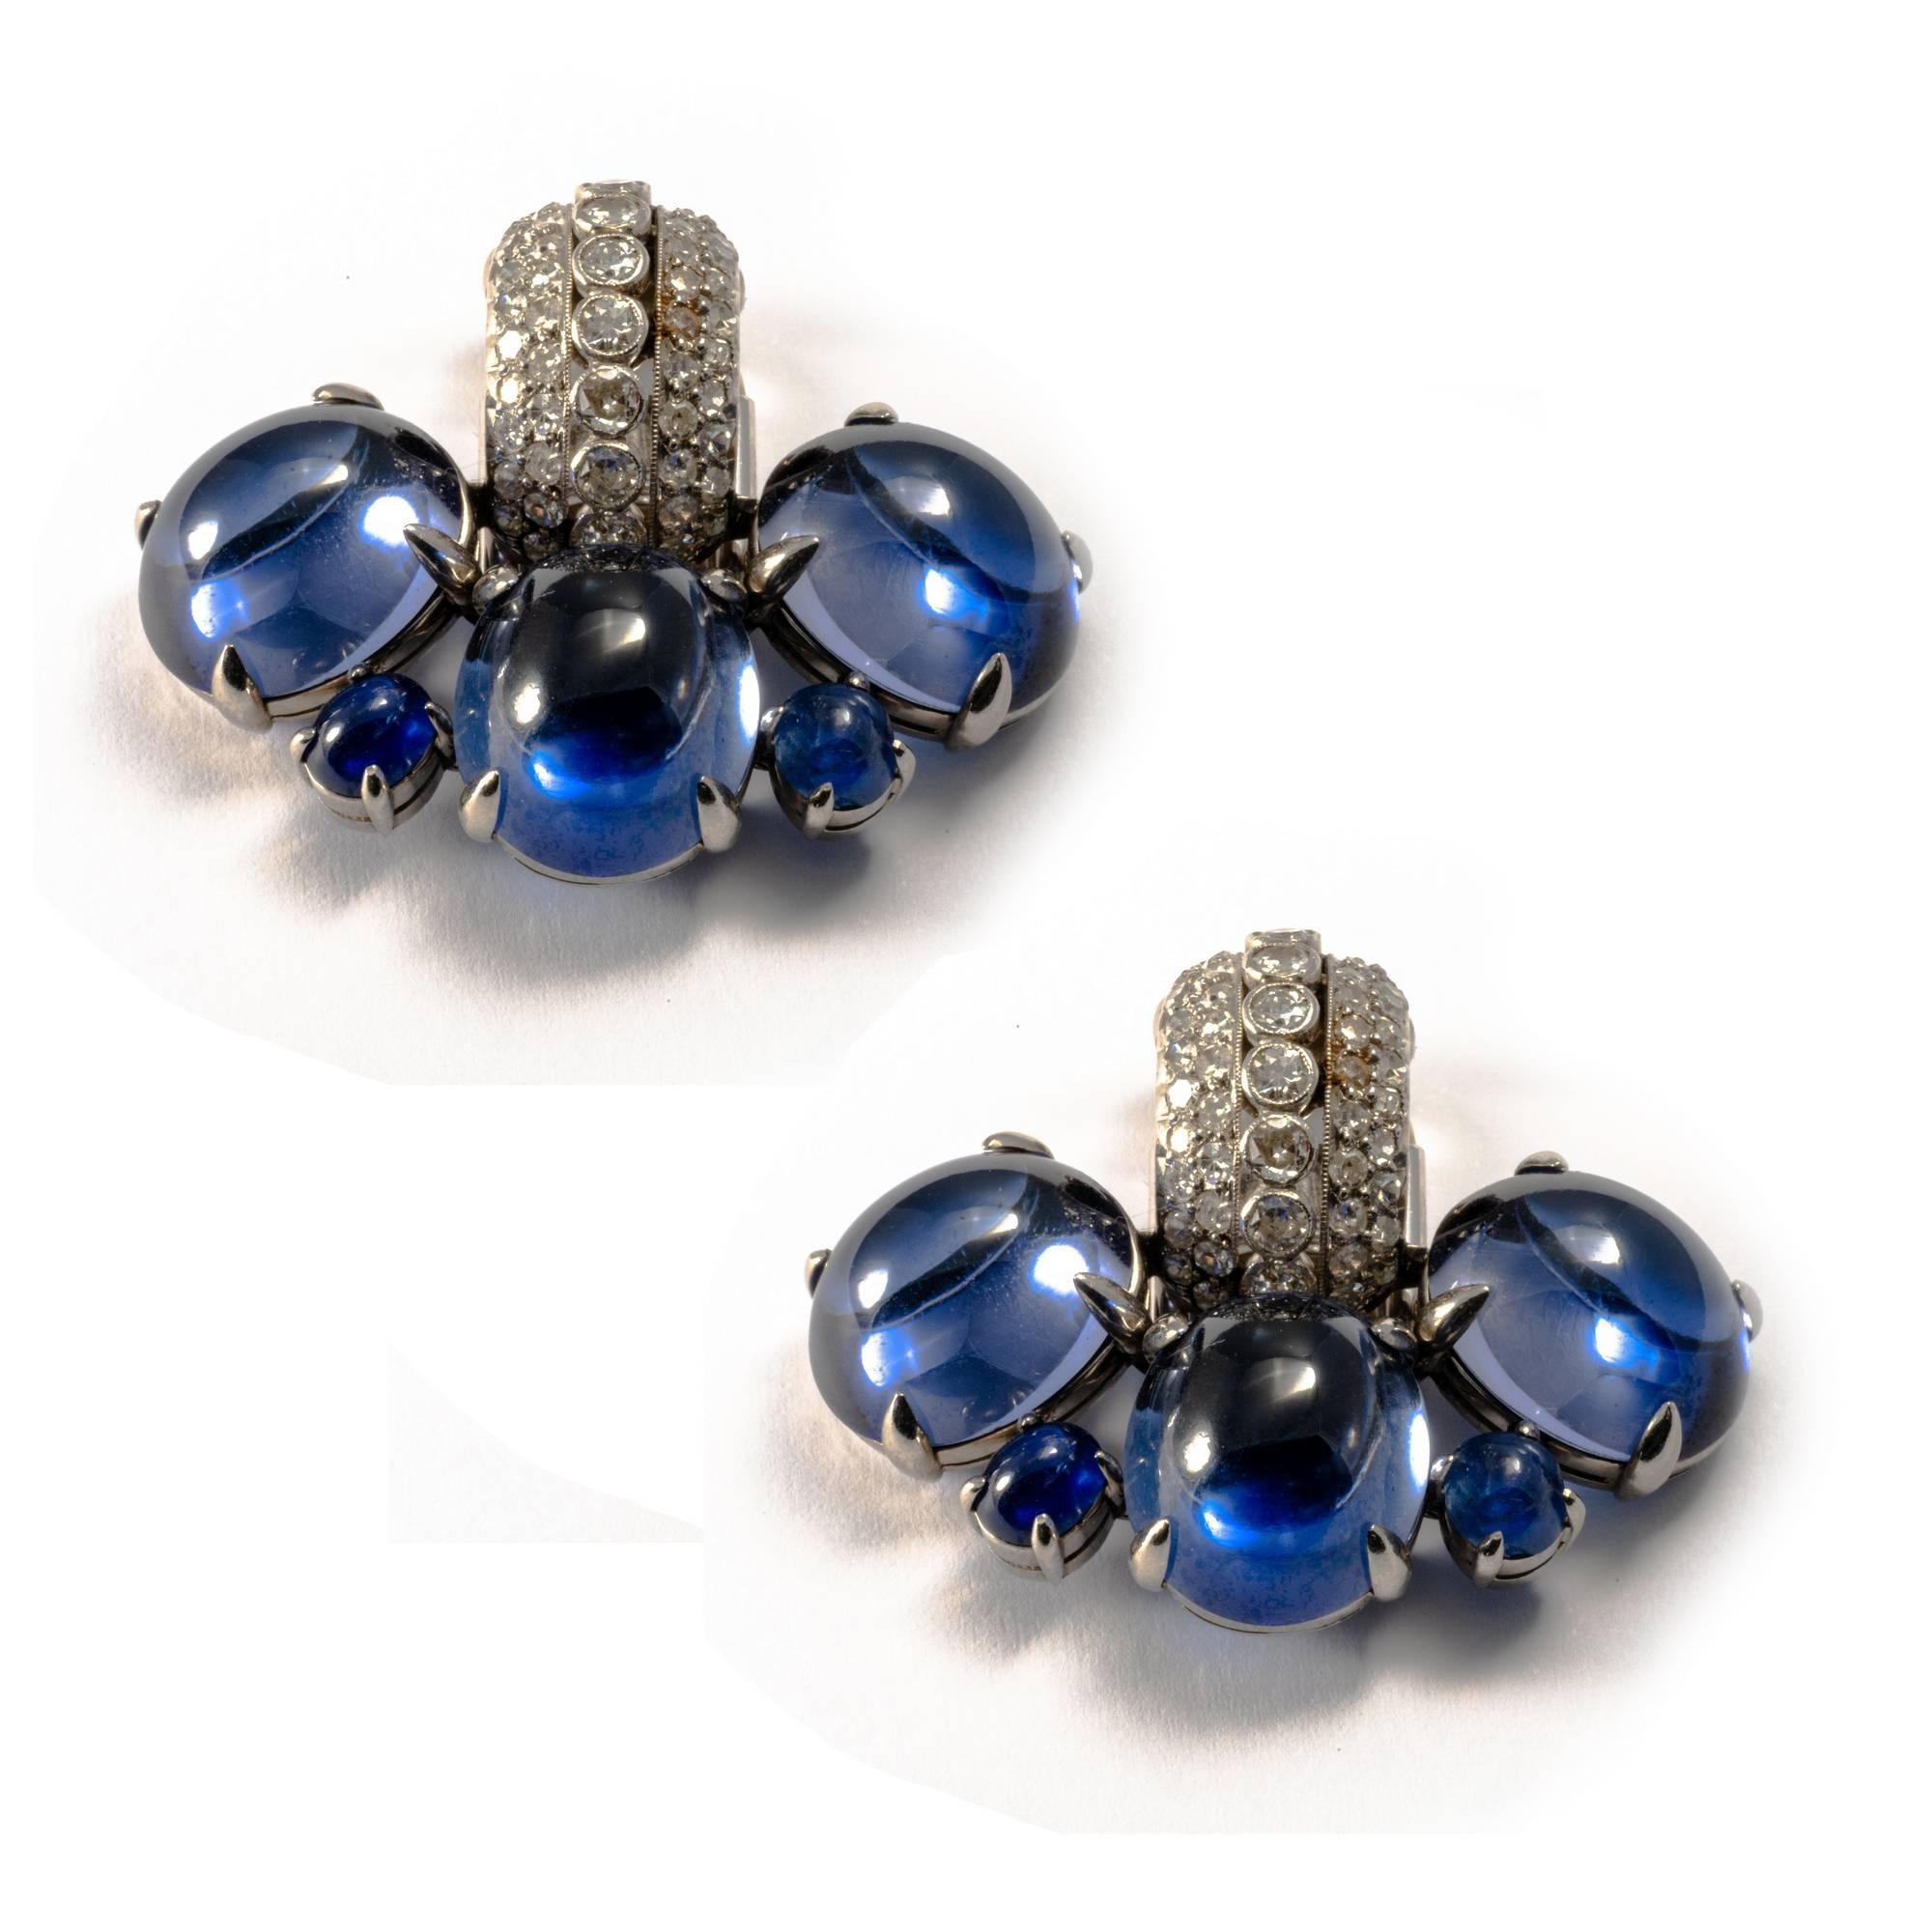 1980-1990 Cabochon Diamond and Sapphire 18K Gold Set Earrings and Pin Brooch In Good Condition For Sale In Roma, IT